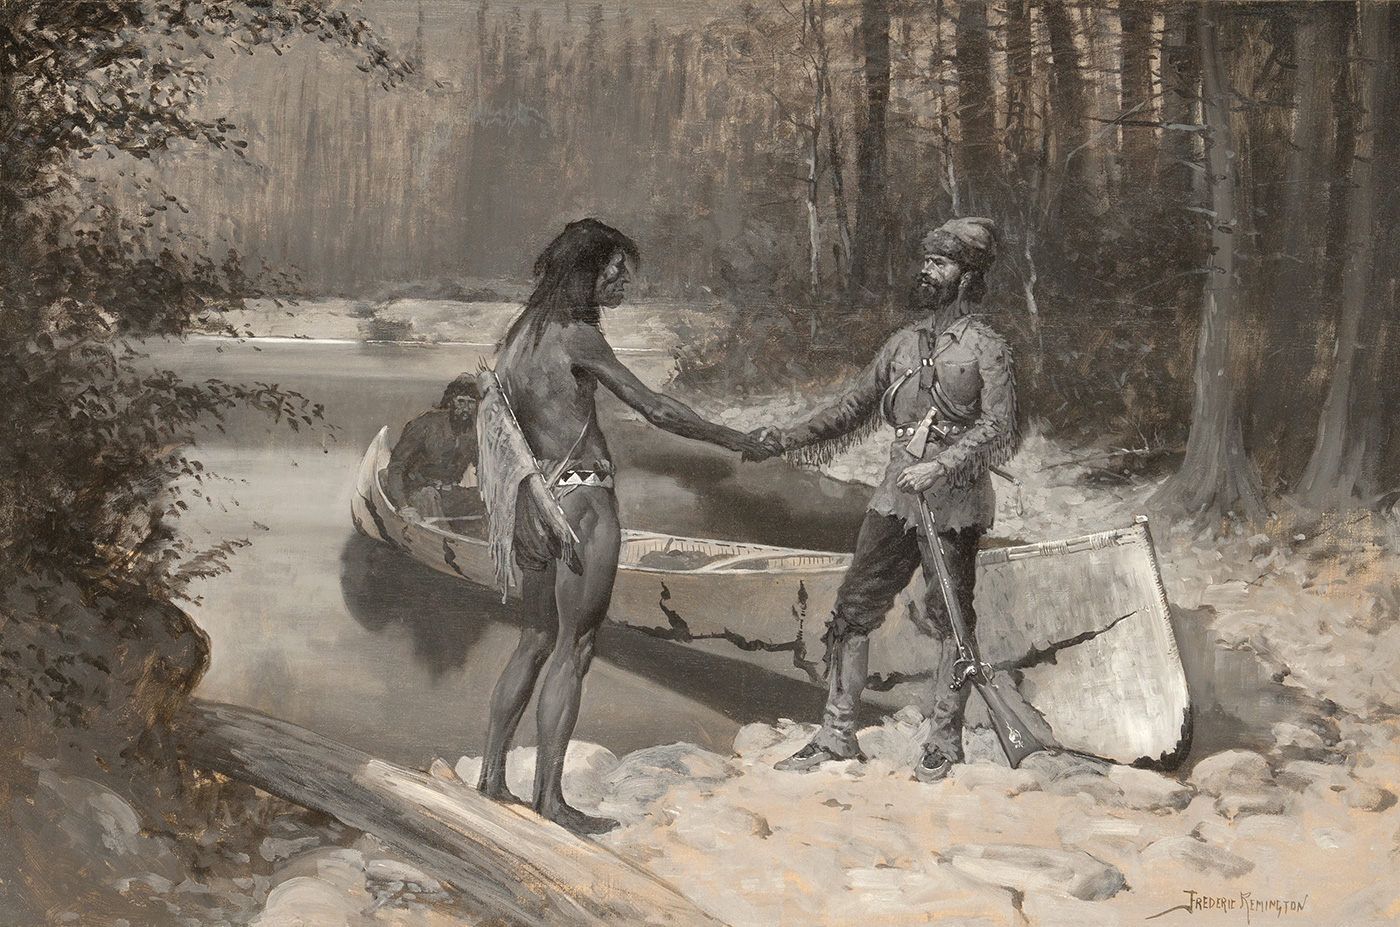 An Anglo man and indigenous American man shake hands while standing next to a canoe in a wooded embankment.